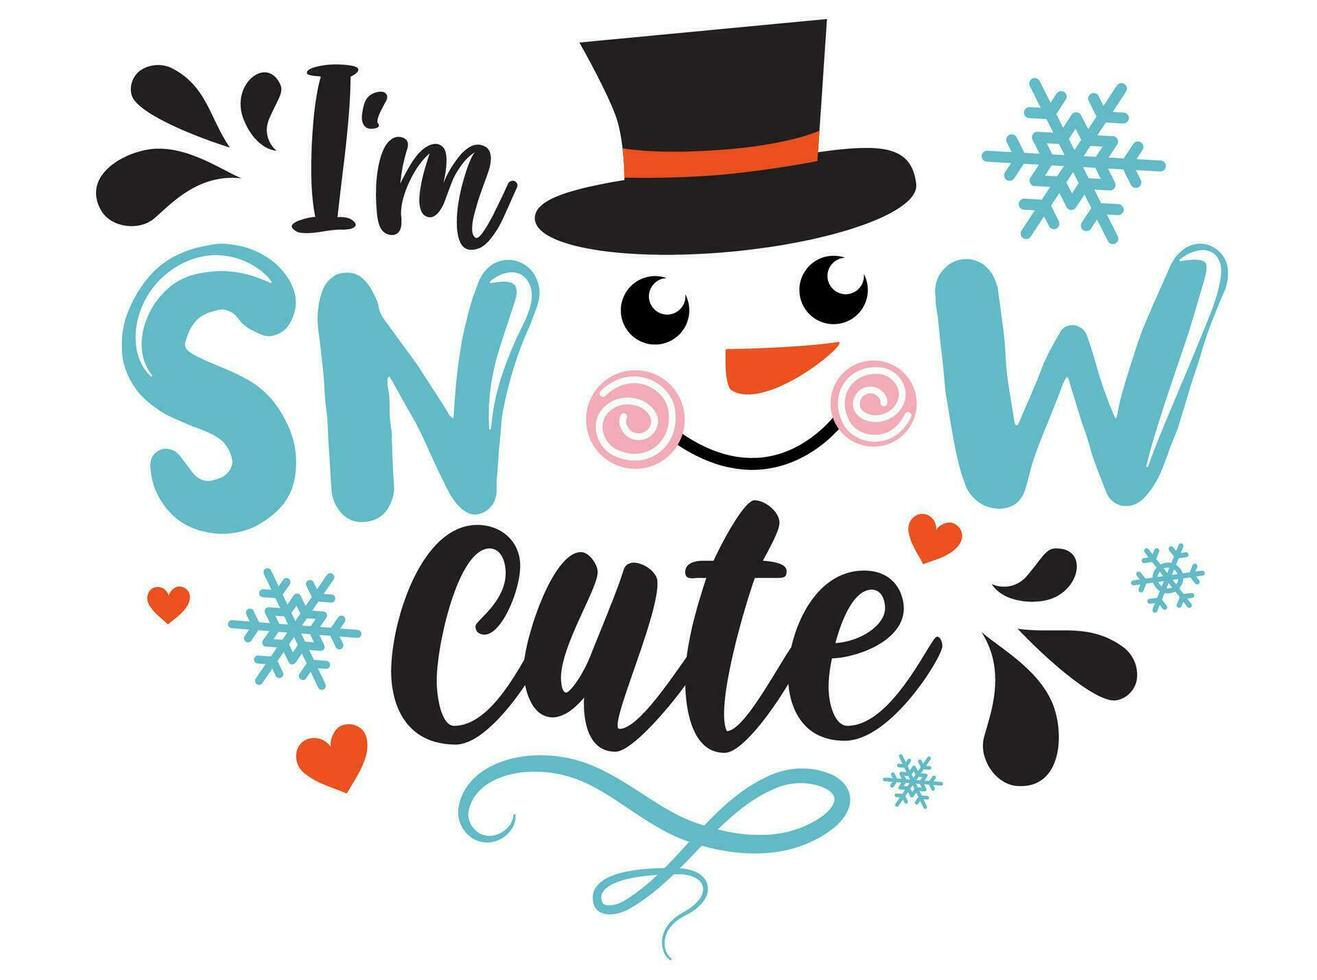 I'm snow cute vector illustration with boy snowmen and snowflakes. Kids Christmas design isolated good for Xmas greetings cards, poster, print, sticker, invitations, baby t-shirt, mug, gifts.